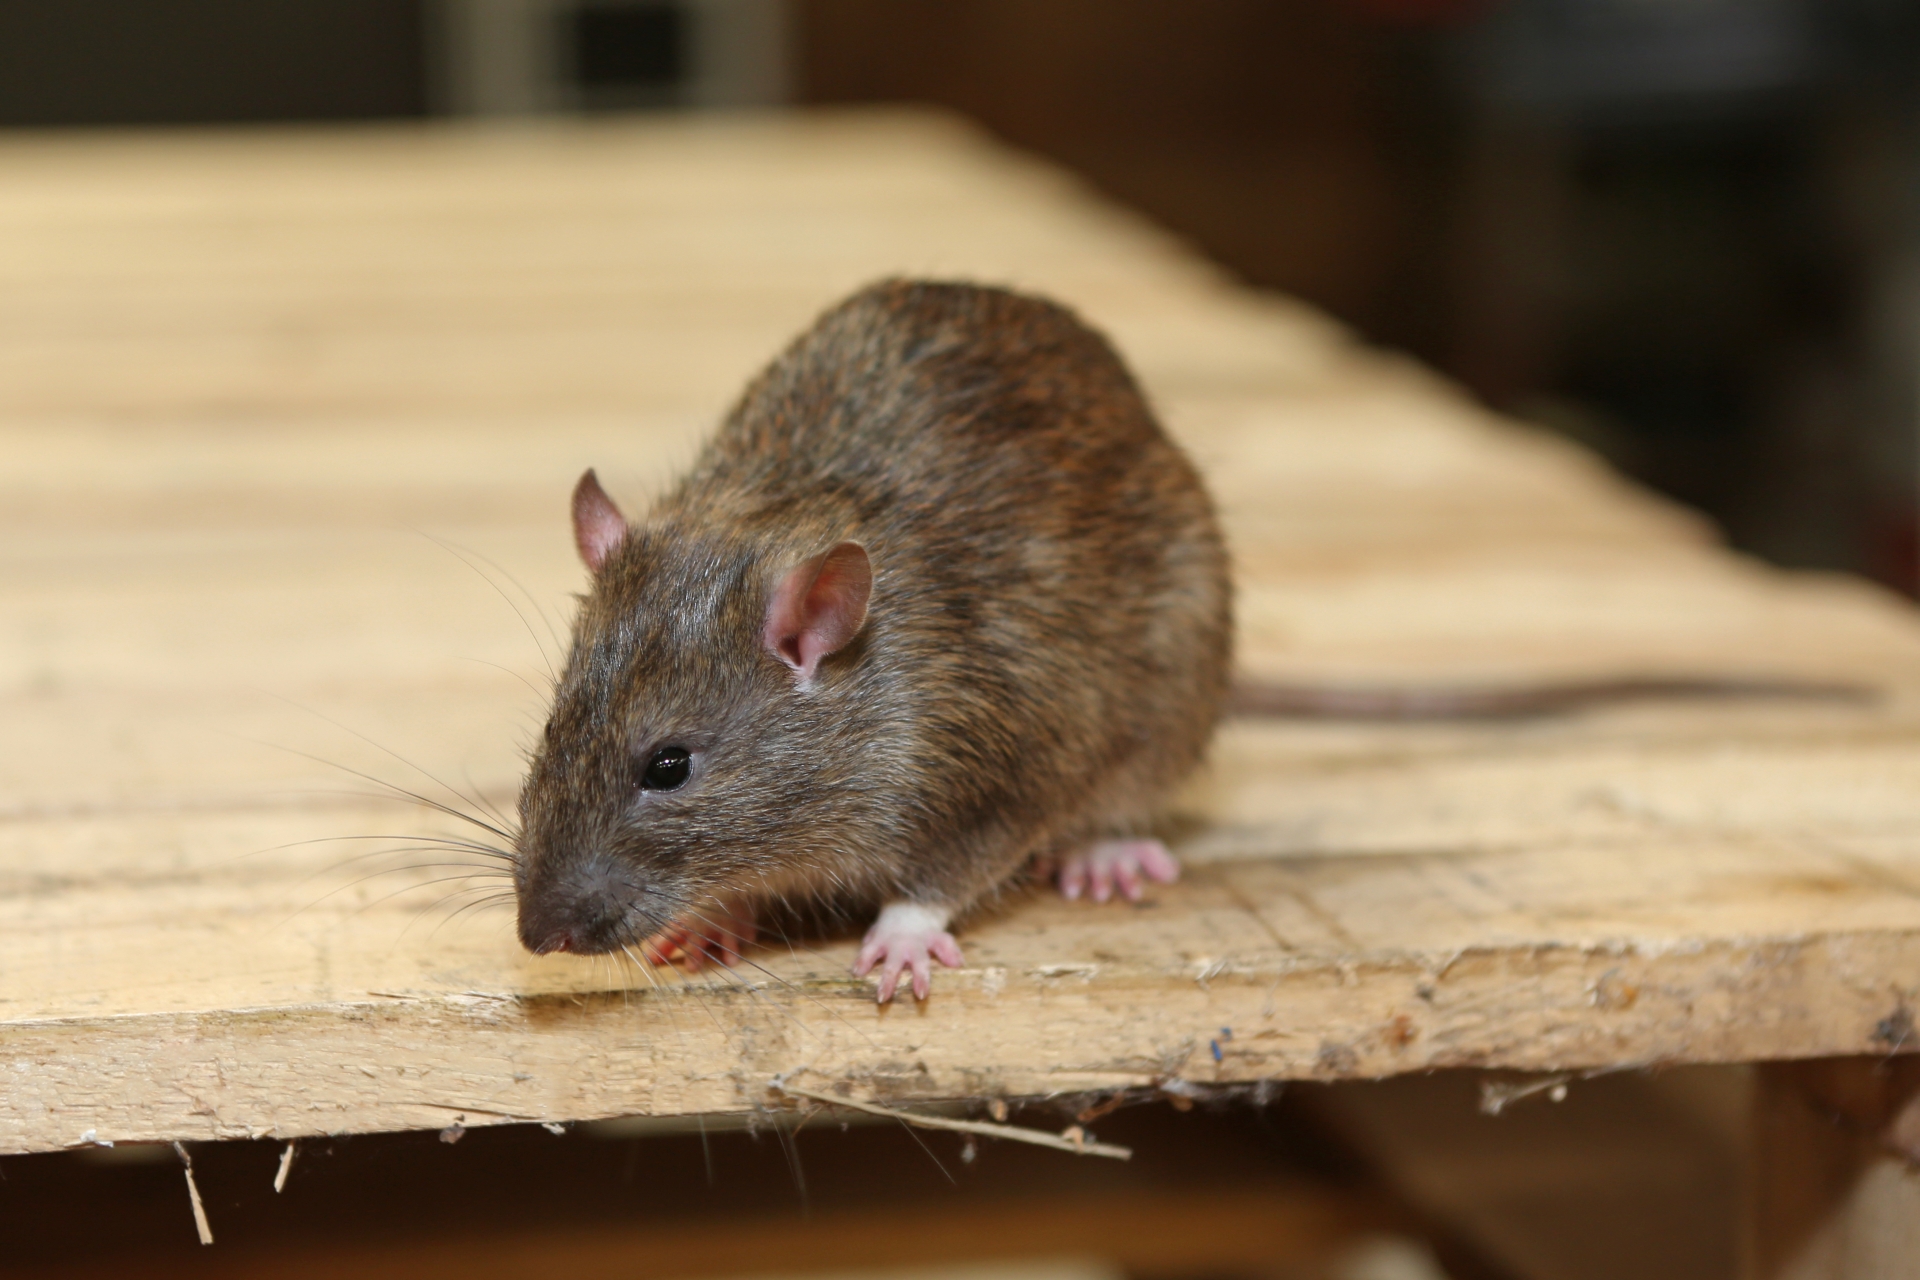 Rat Control, Pest Control in North Cheam, Stonecot Hill, SM3. Call Now 020 8166 9746